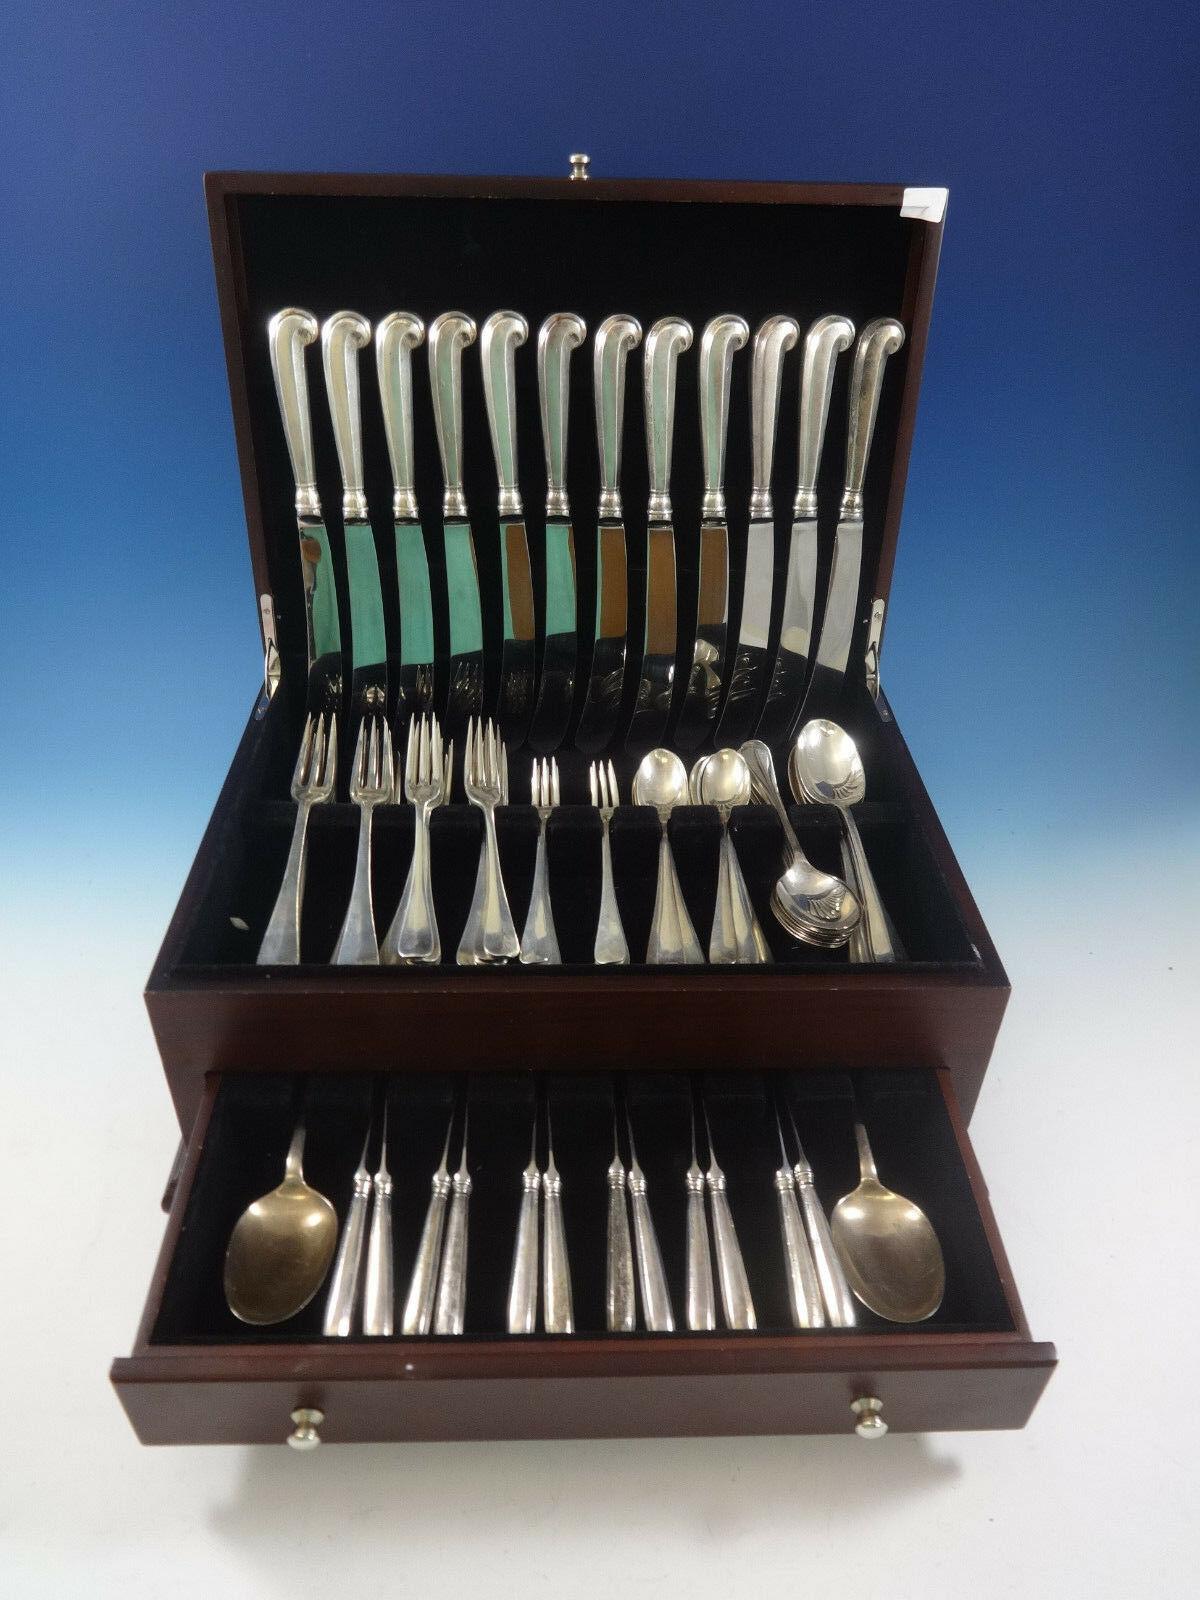 Large queen Anne Williamsburg by Stieff sterling silver flatware set, 86 pieces. This set includes:

12 dinner knives, 9 1/4